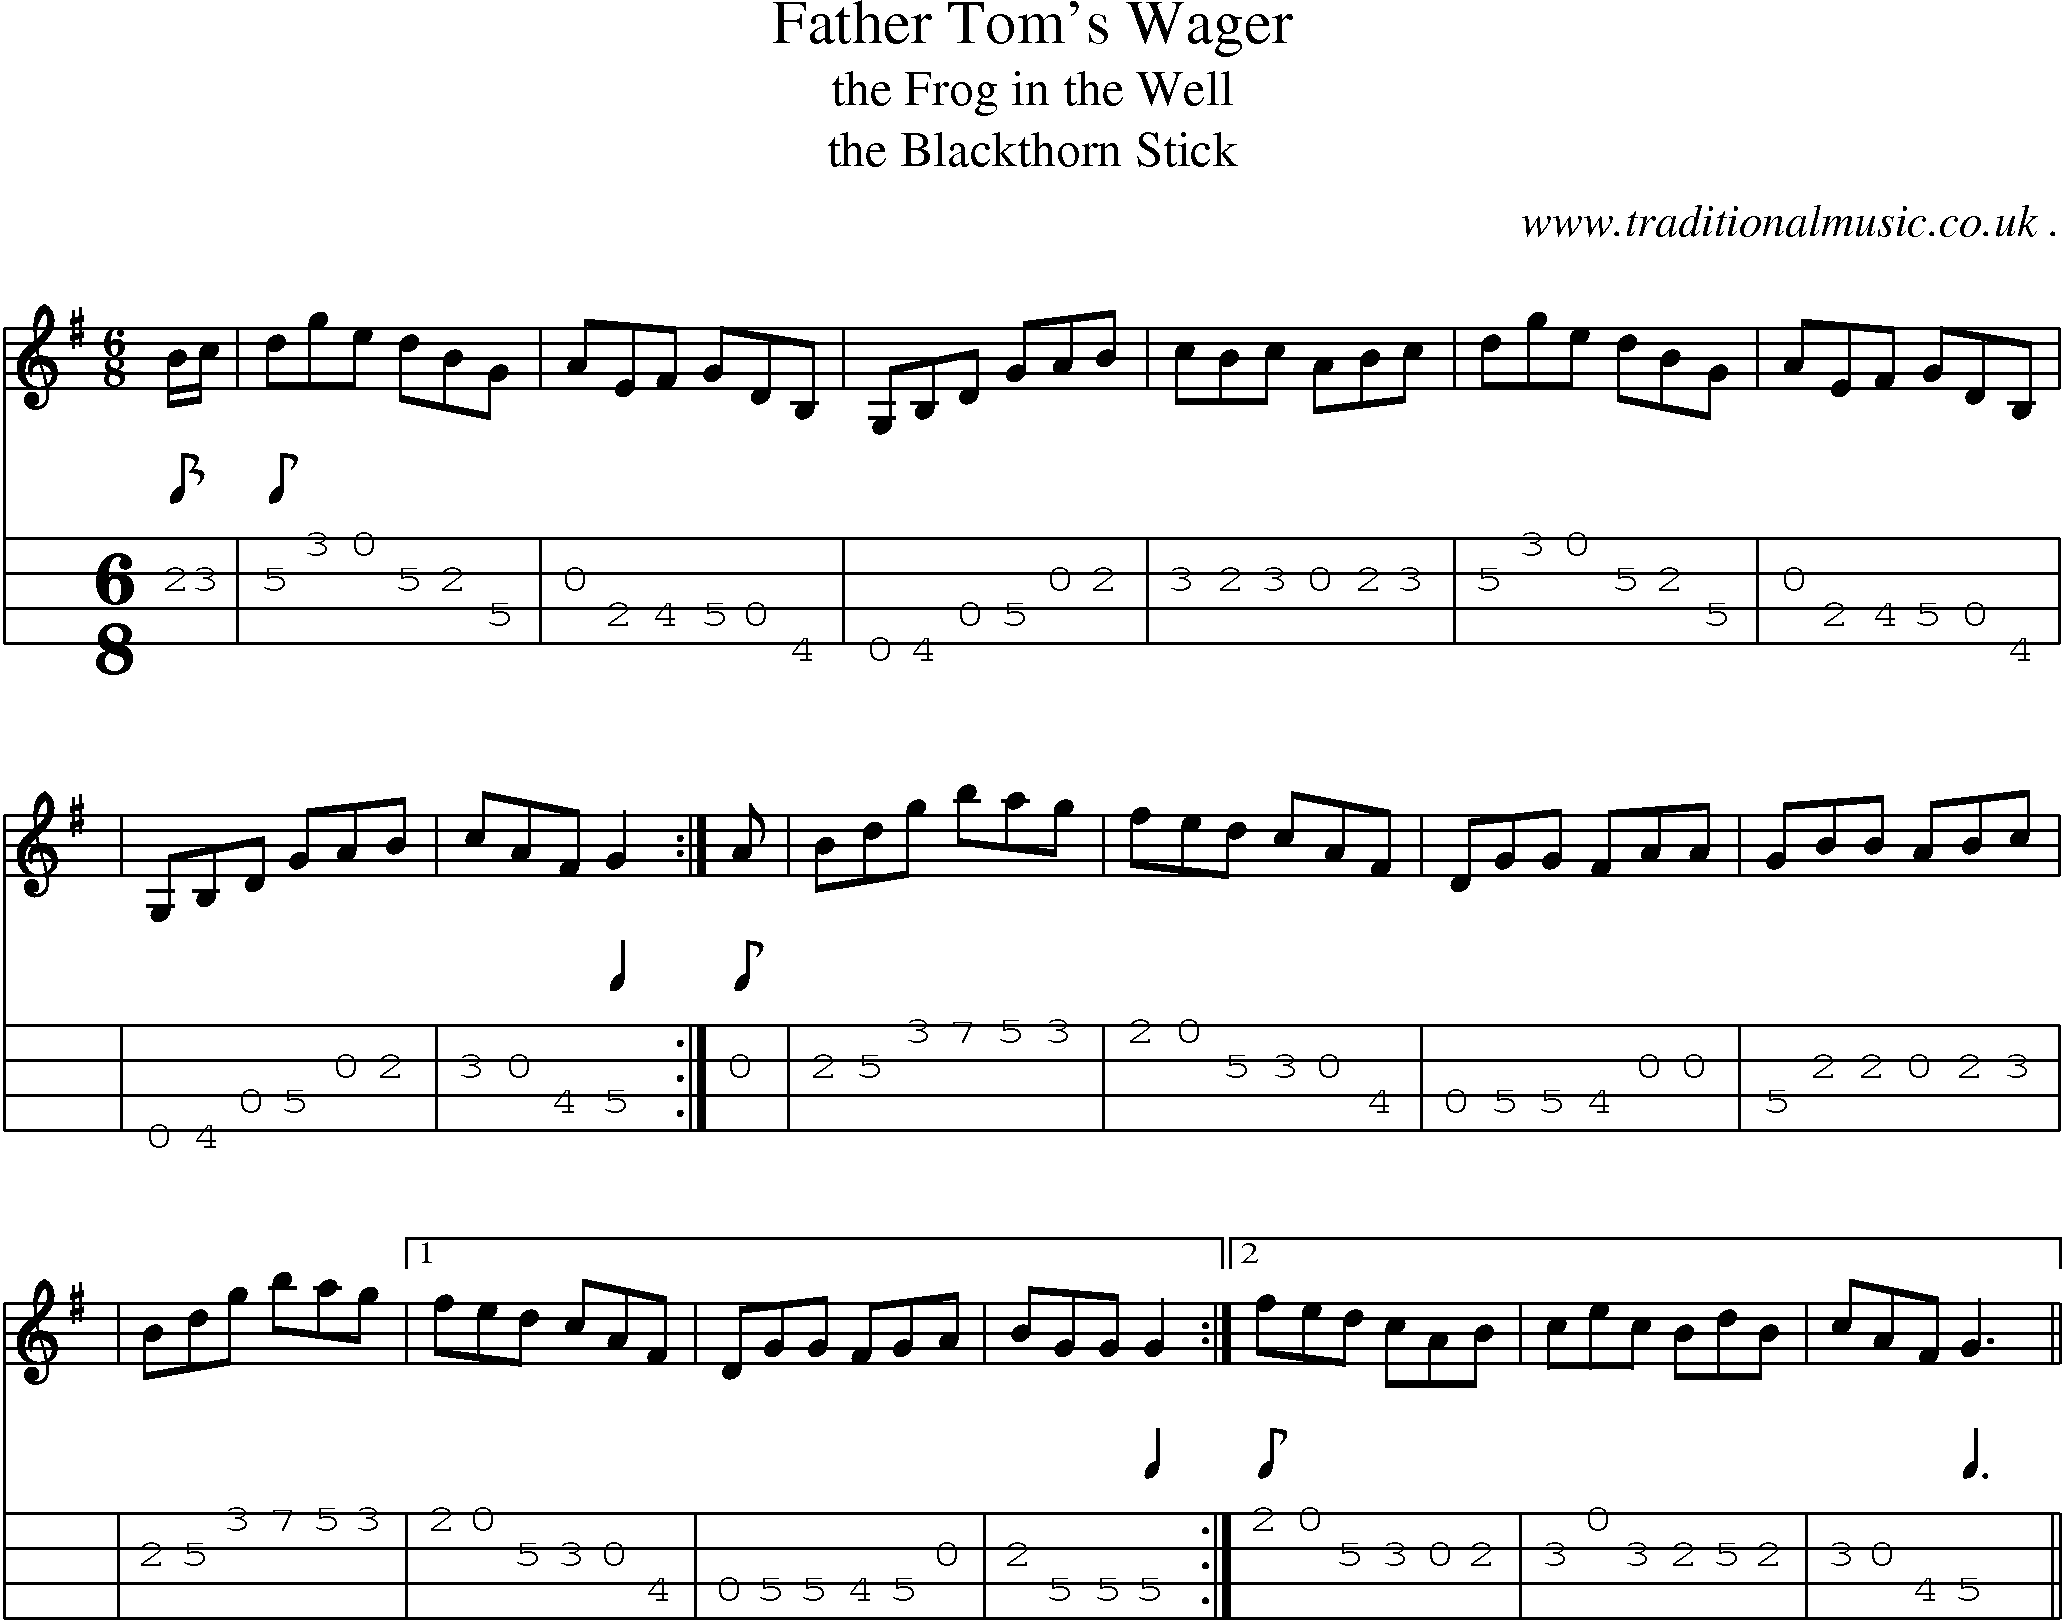 Sheet-music  score, Chords and Mandolin Tabs for Father Toms Wager